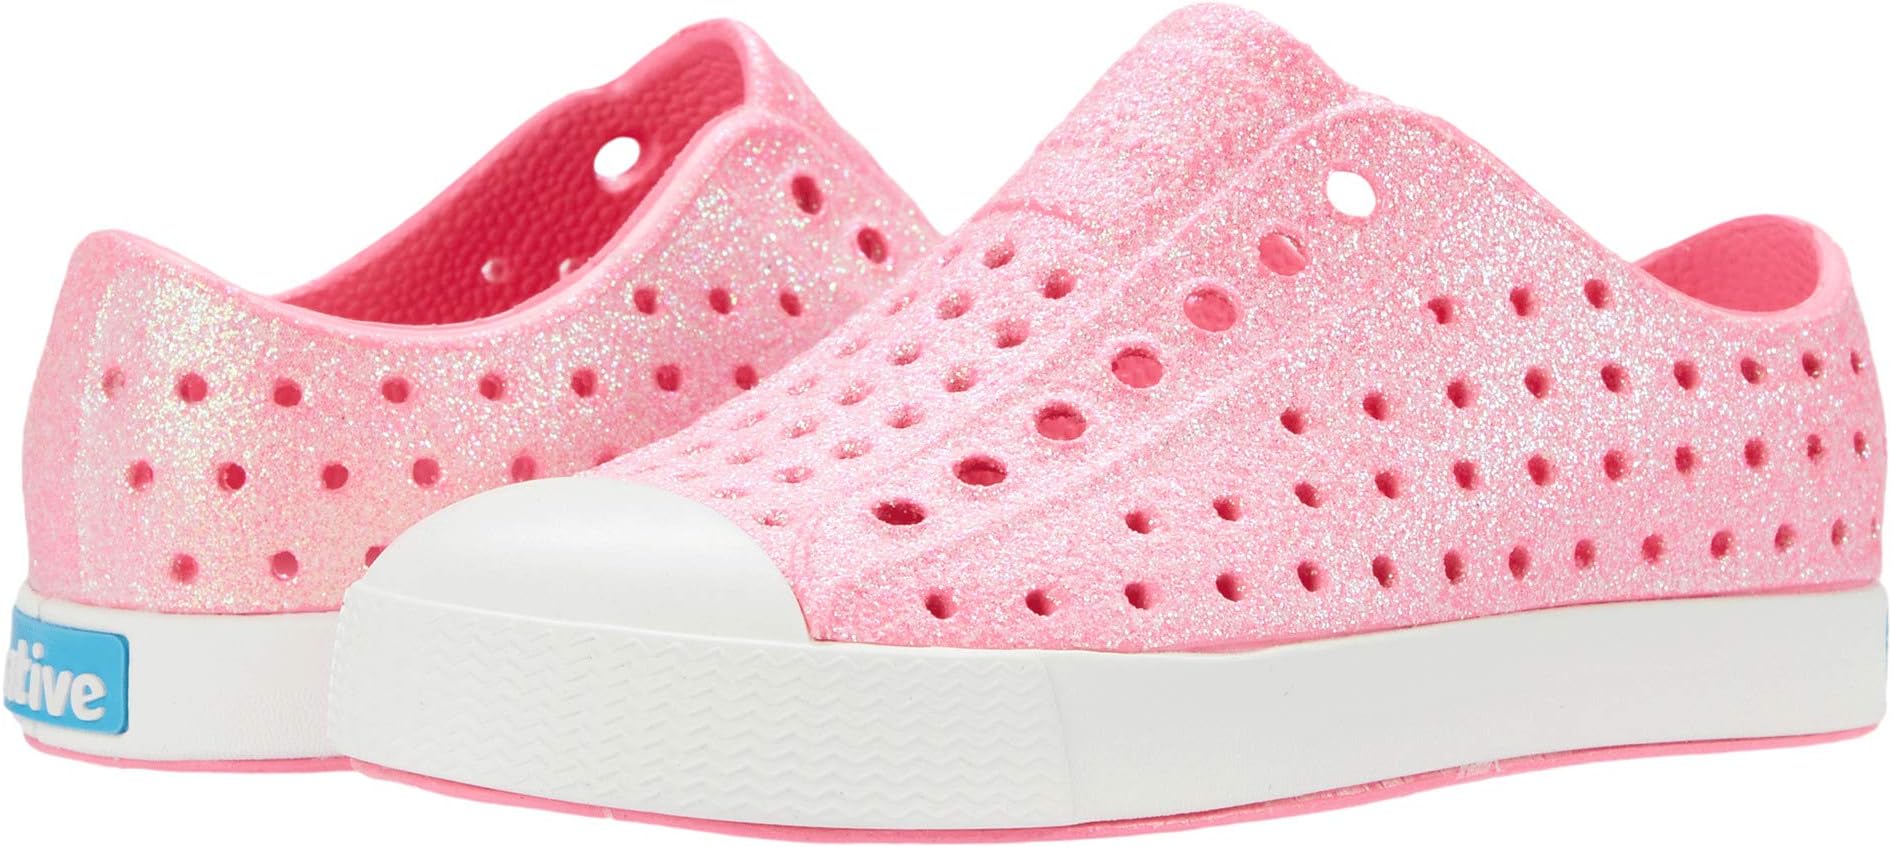 Кроссовки Jefferson Bling Glitter Native Shoes Kids, цвет Floyd Pink Bling Glitter/Shell White children casual sneakers girl pink princess bling sequins light tennis running shoes kids students black soft sports shoes 26 37